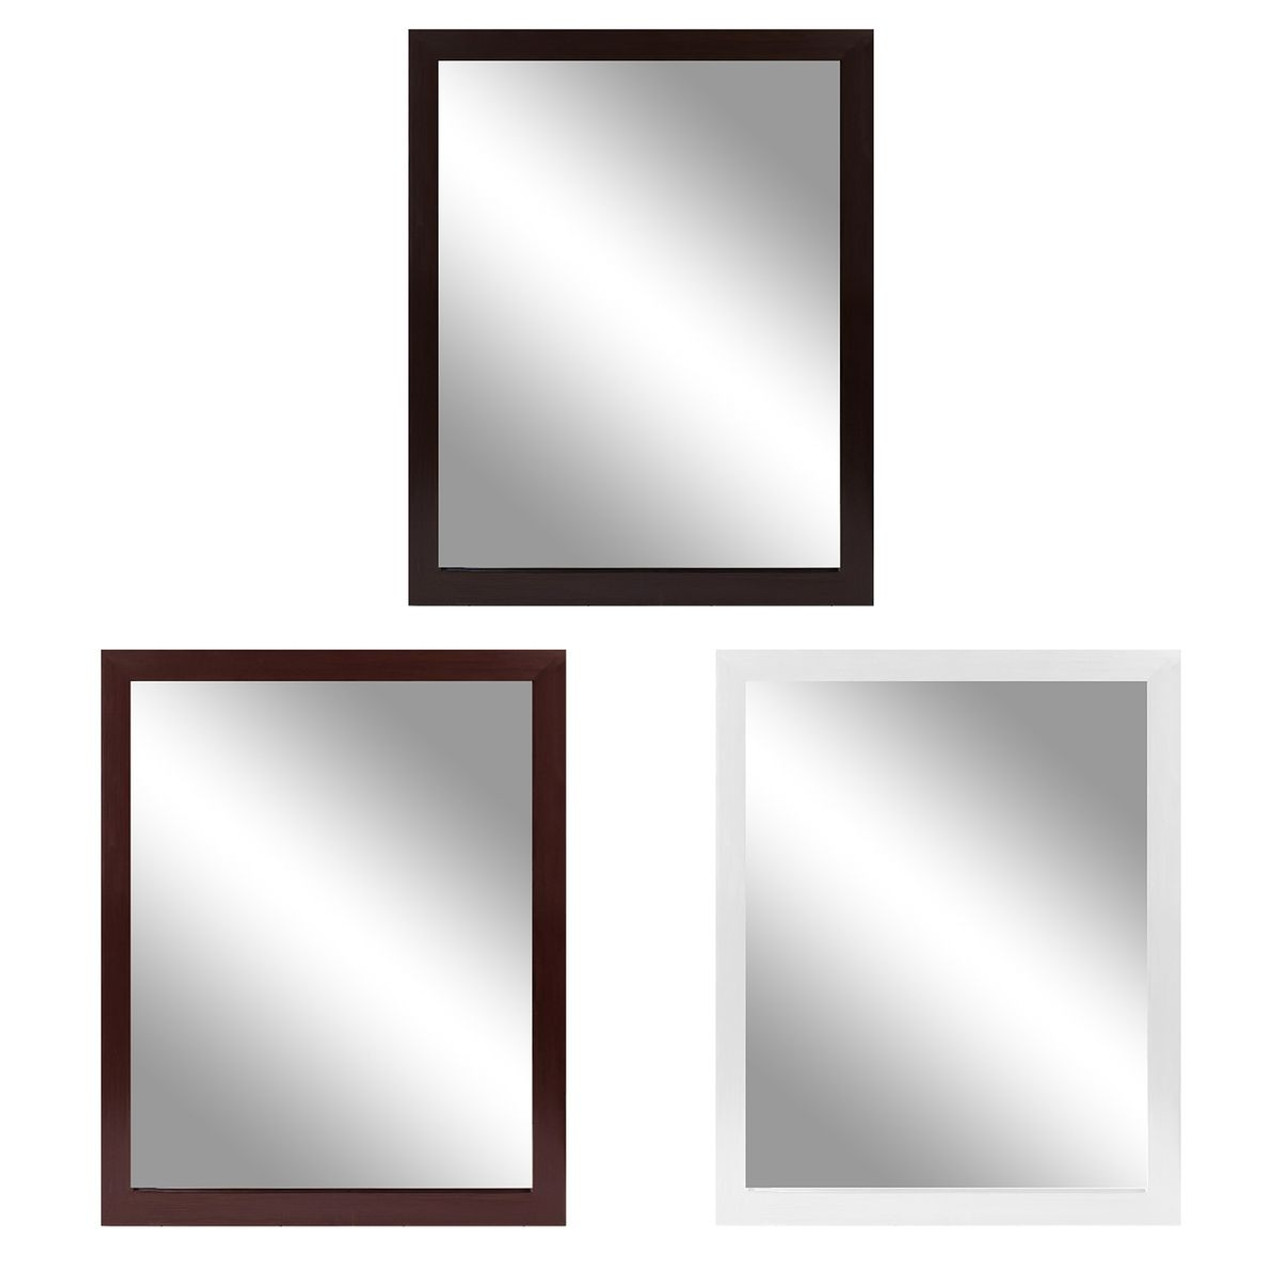  NewHome Wall Mounted Mirror product image